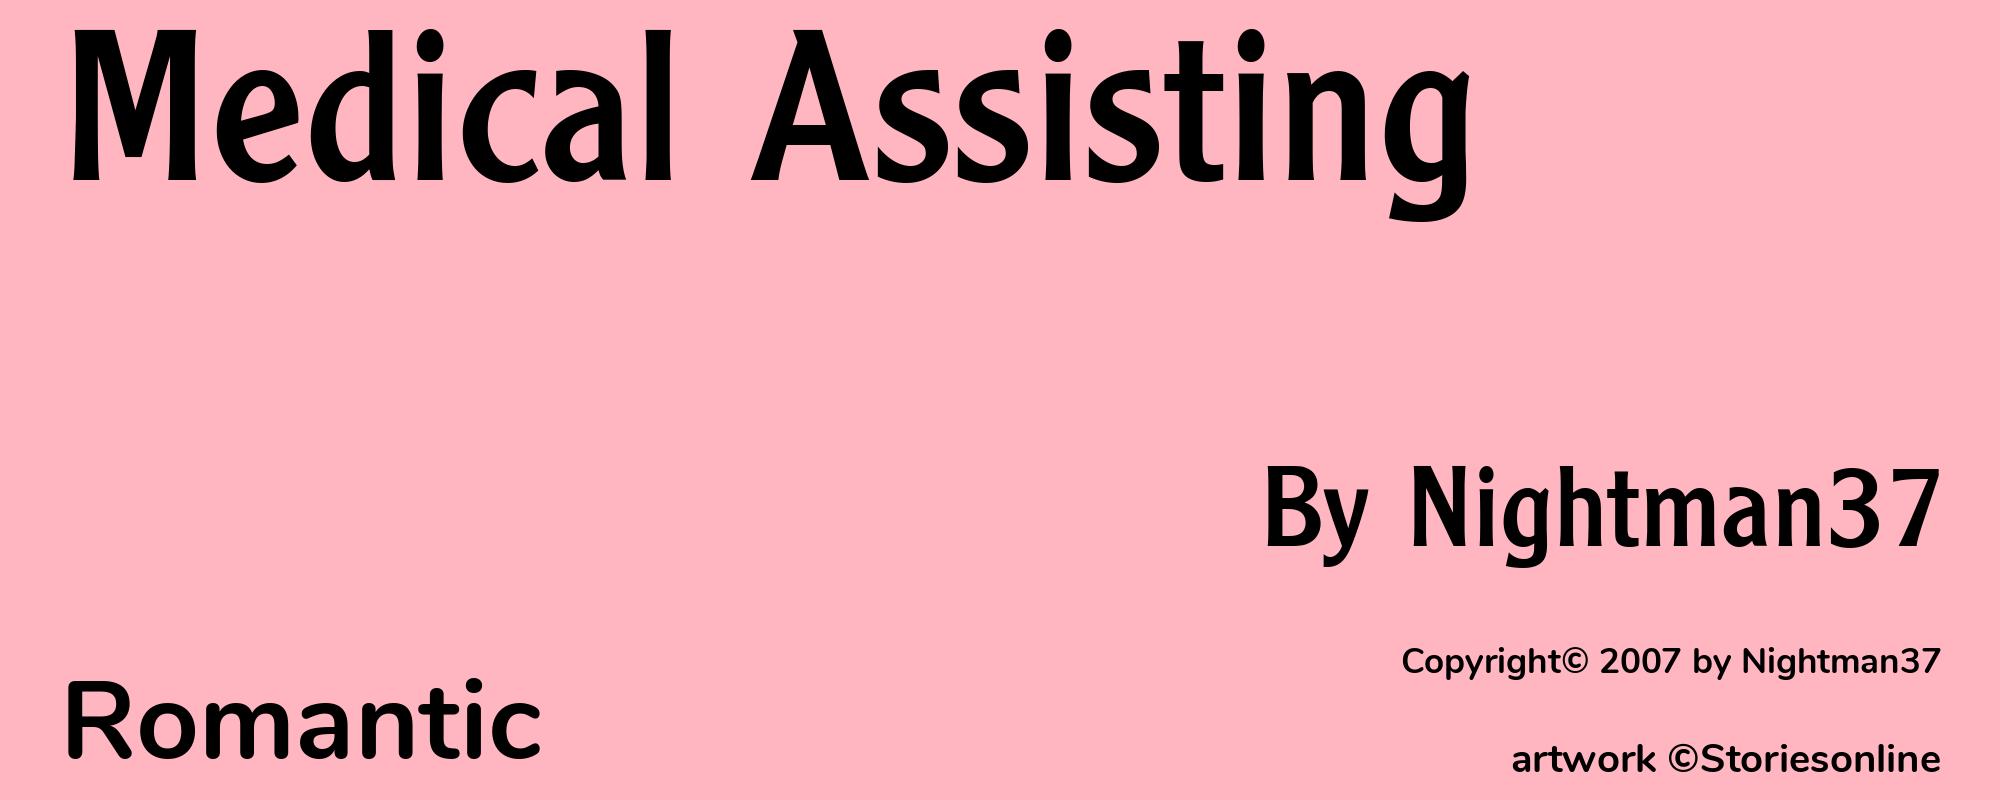 Medical Assisting - Cover